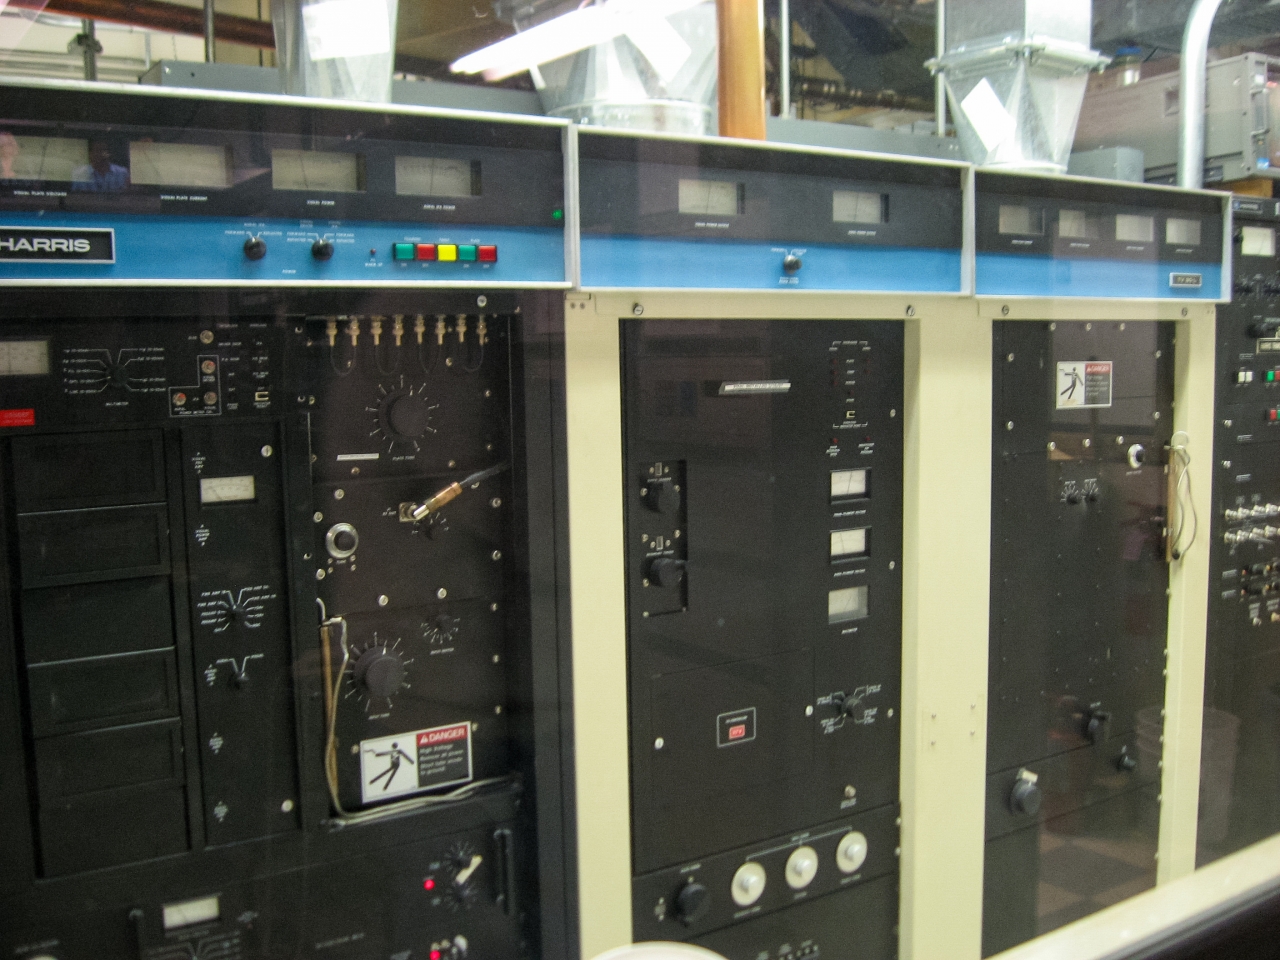 This classic analog transmission equipment was going to be removed soon after my visit to Sutro Tower.